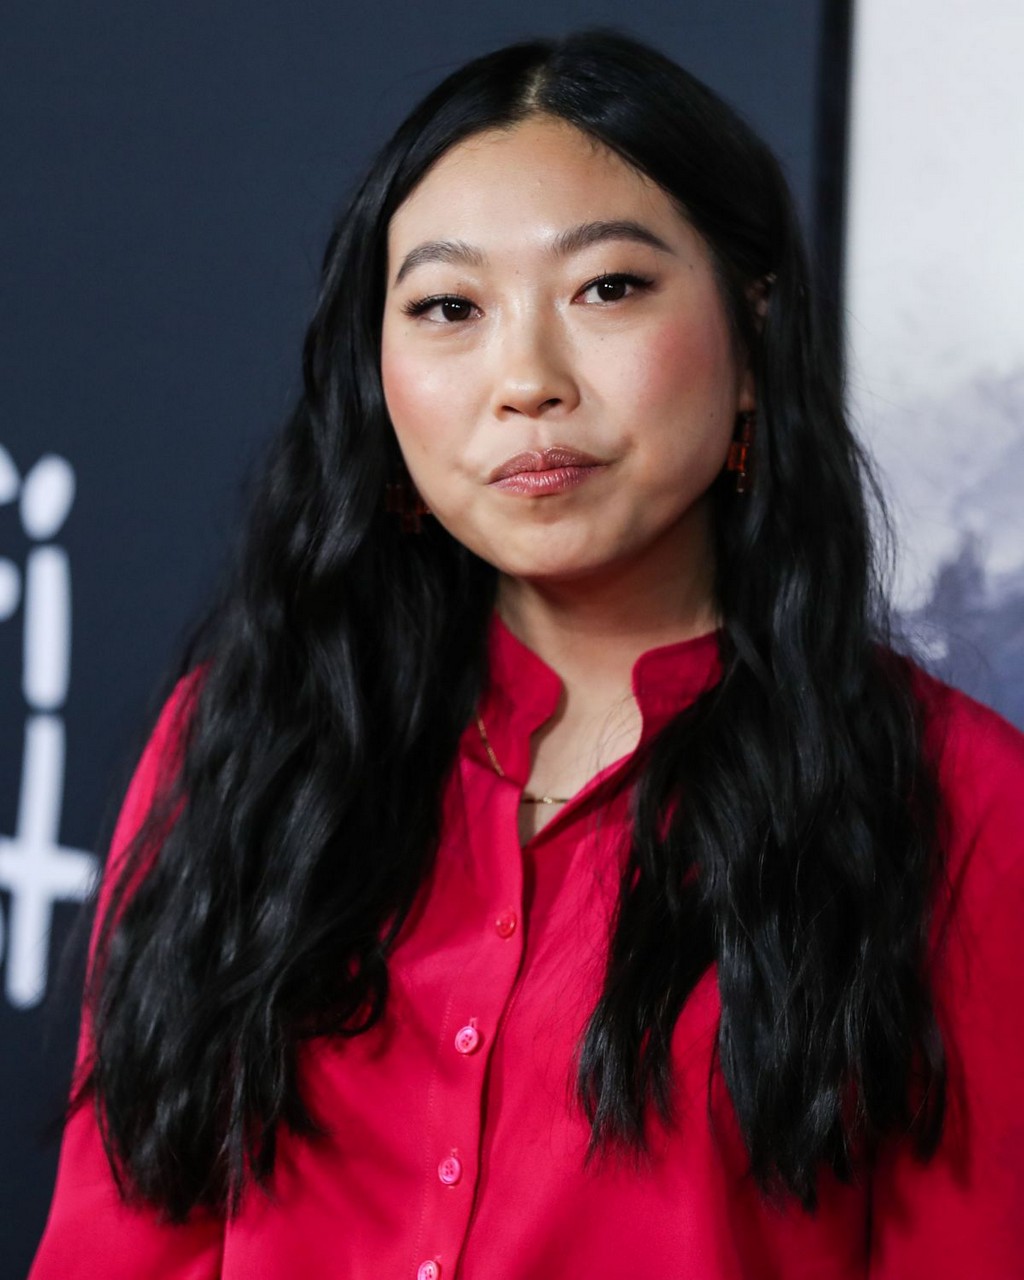 Awkwafina Swan Song Premiere 2021 Afi Fest Hollywood